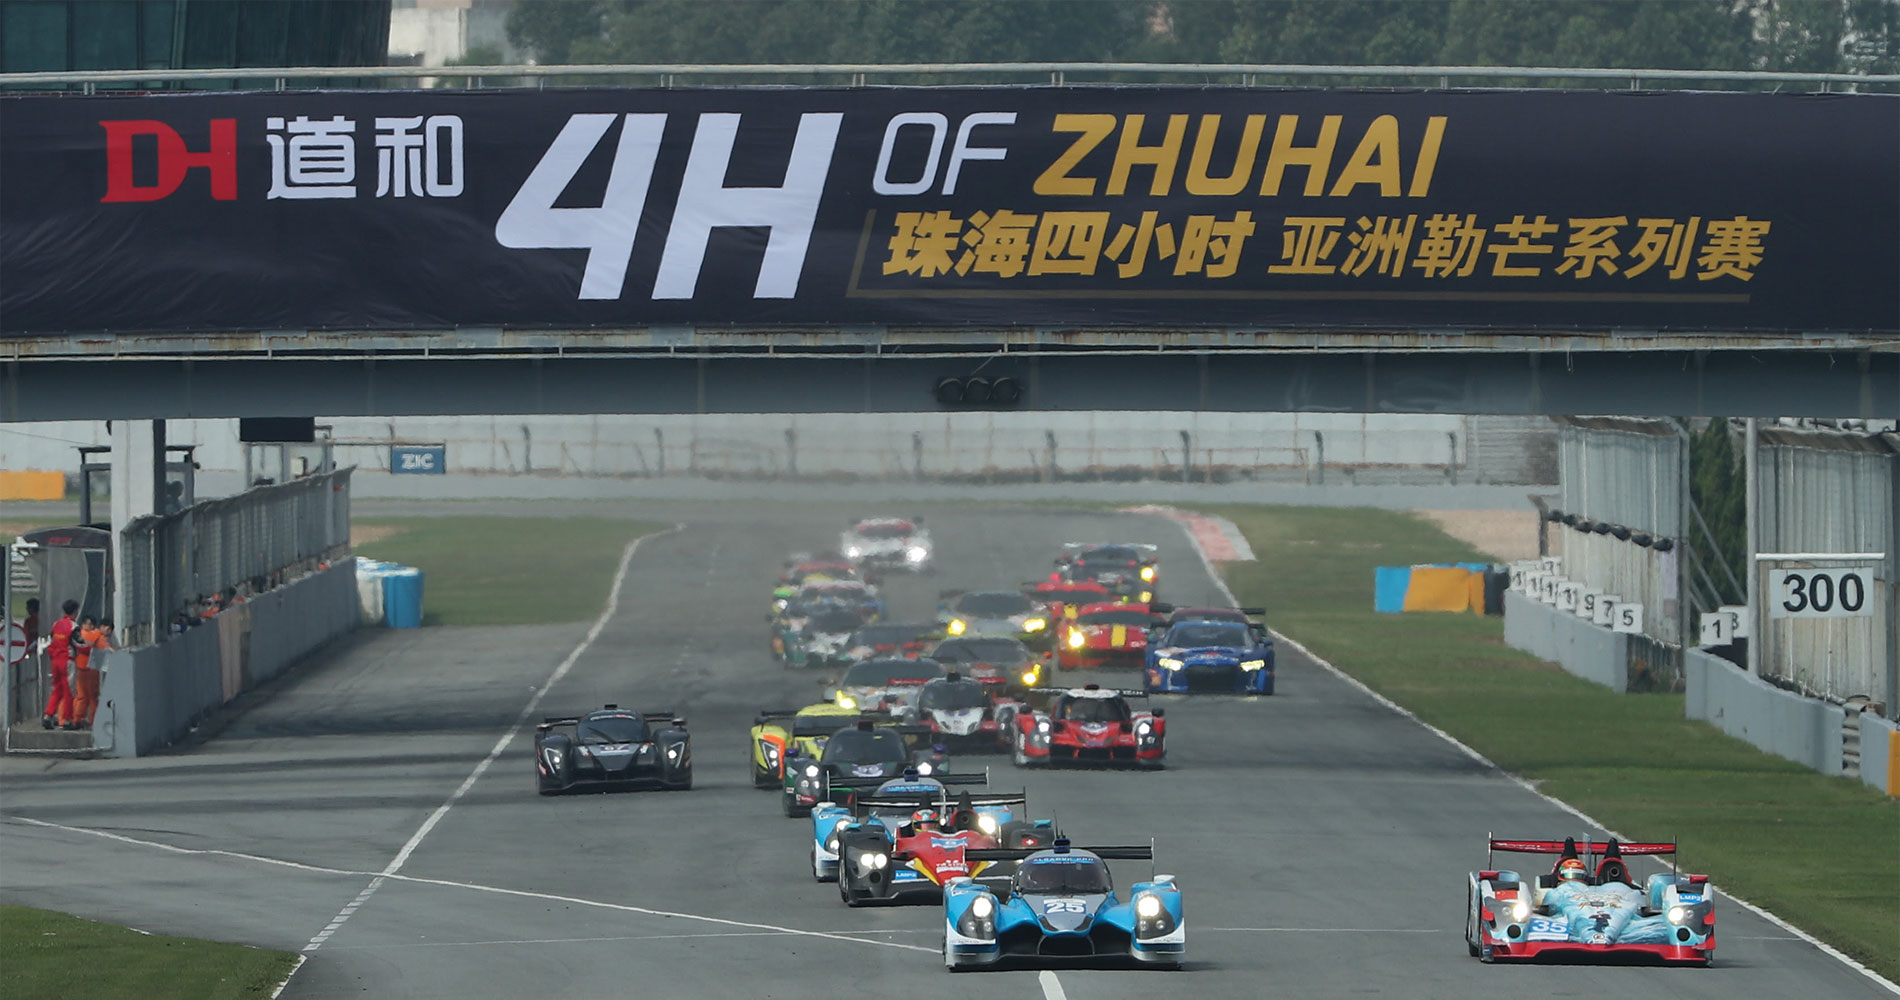 jackie-chan-dc-racing-has-won-the-4-hours-of-zhuhai-motorsportdays-track-days-1